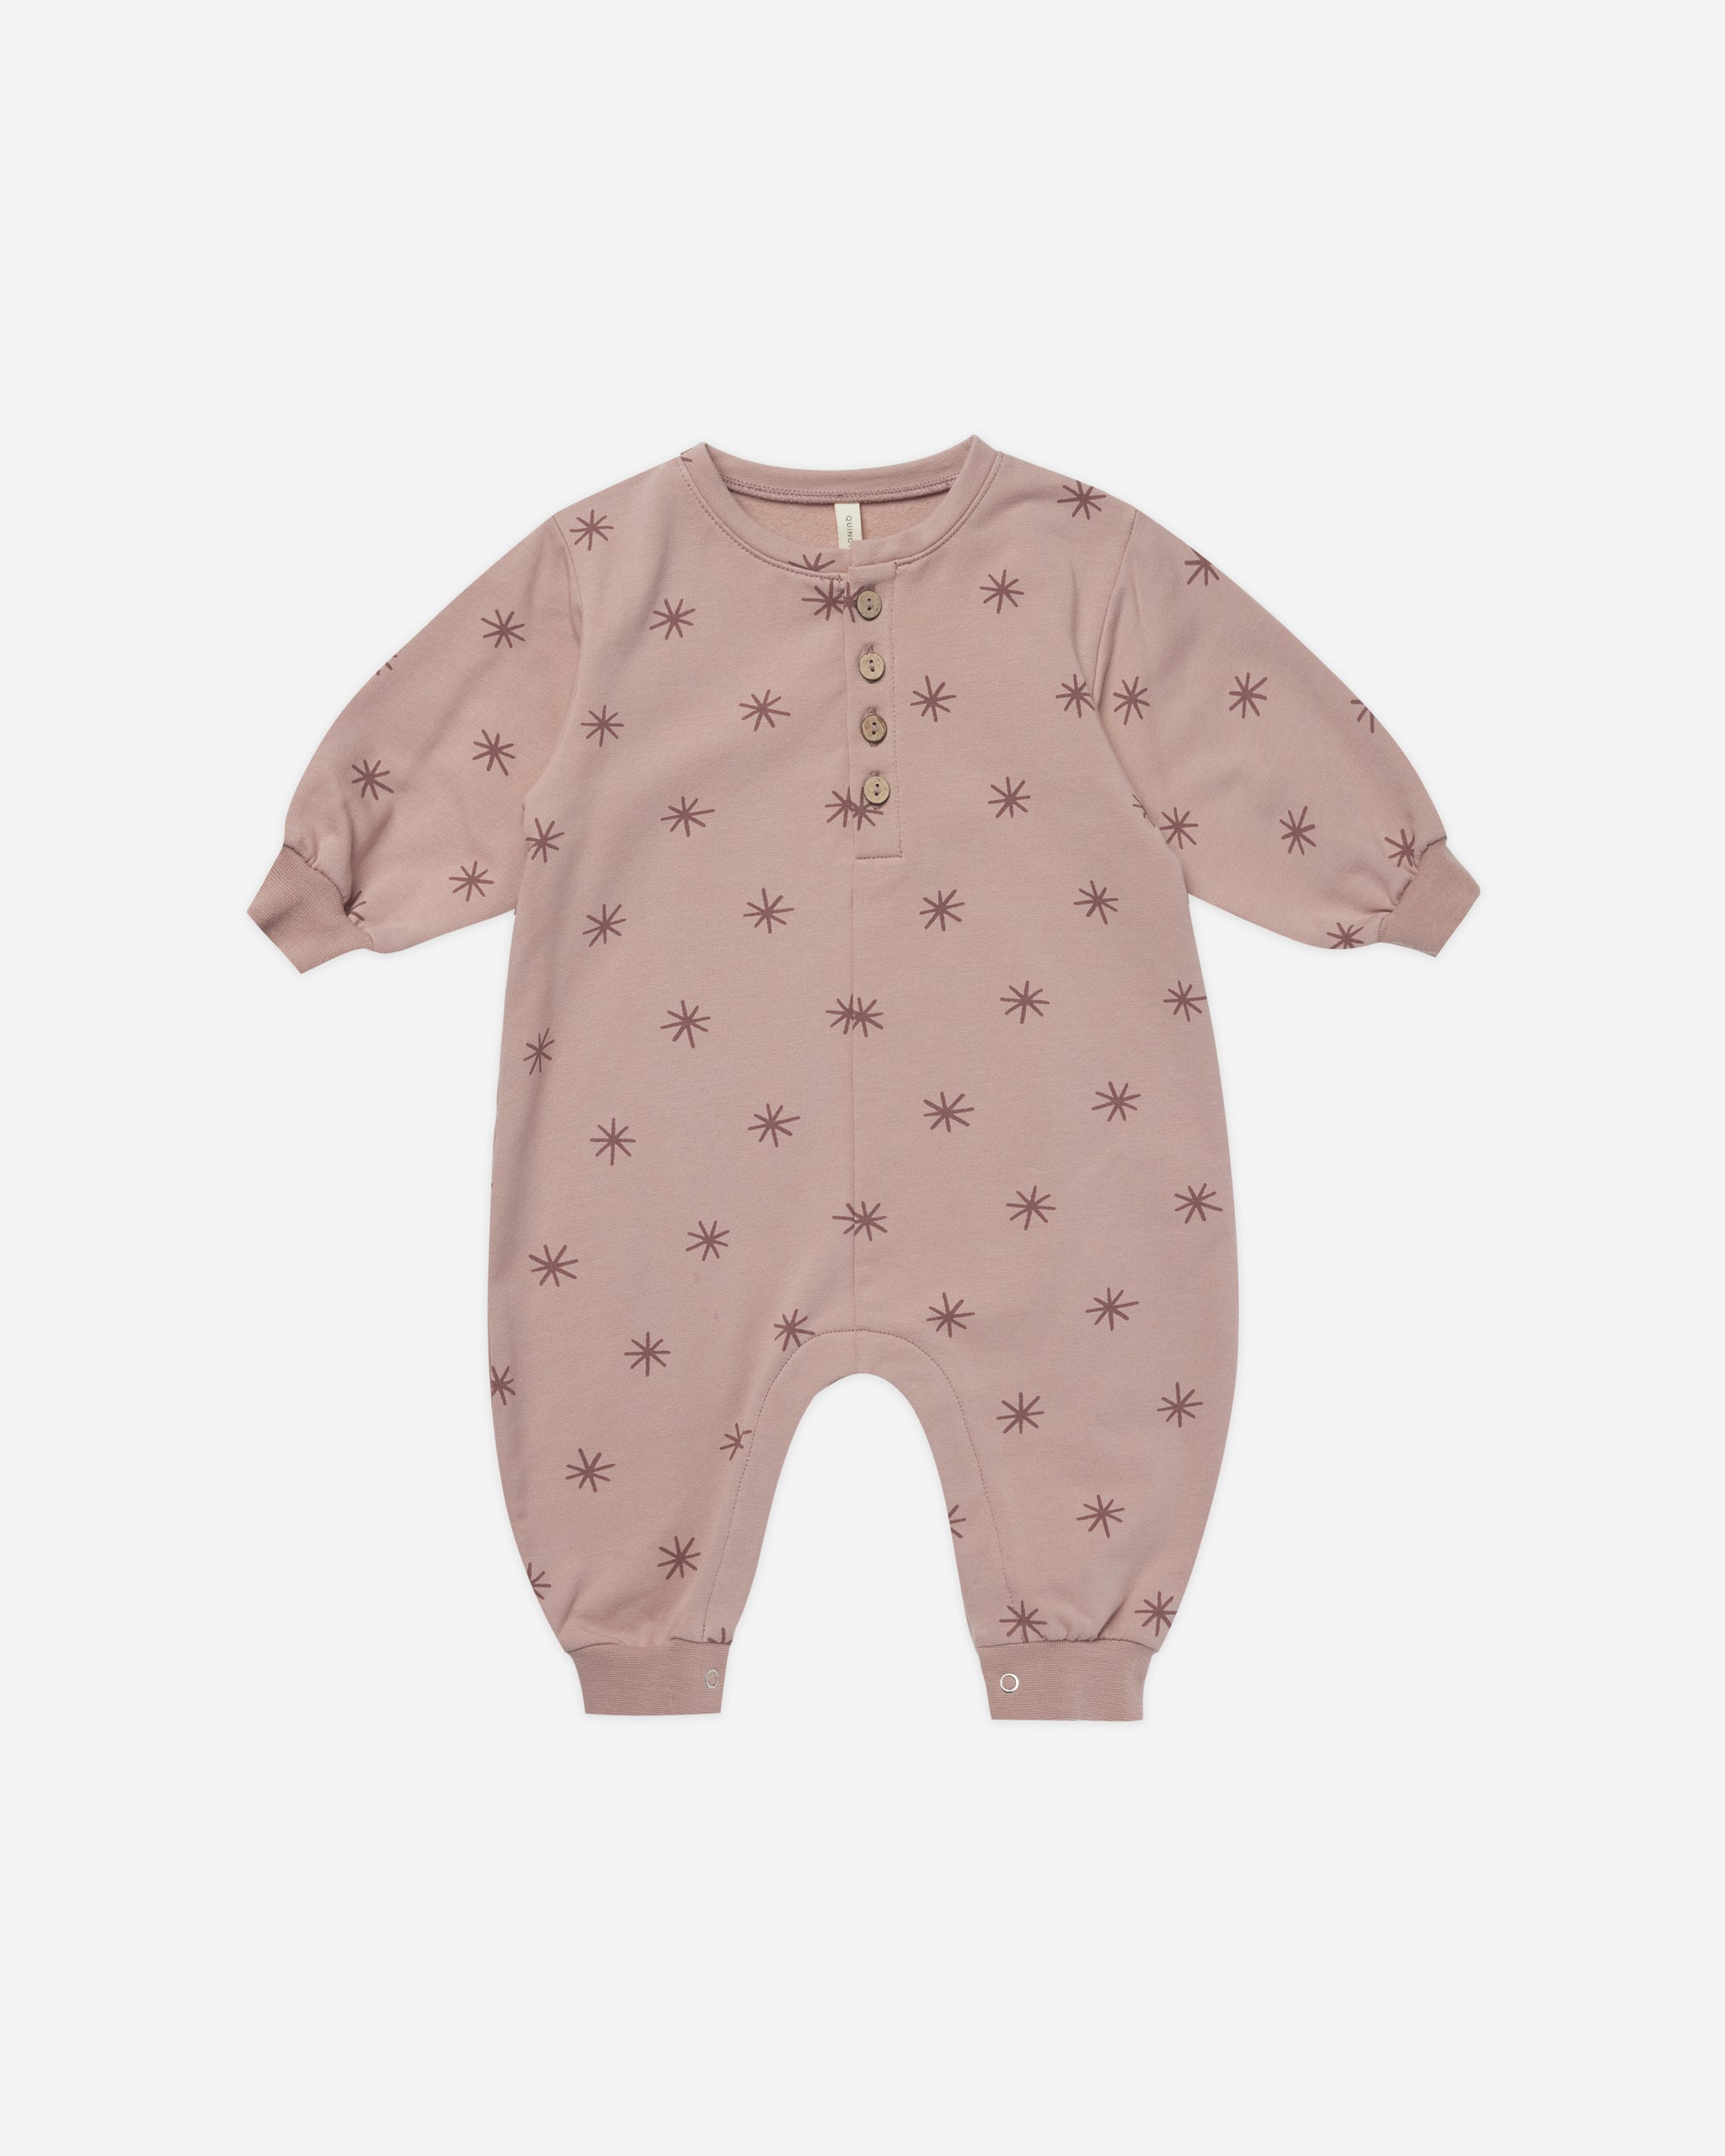 Relaxed Fleece Jumpsuit || Snow Stars - Rylee + Cru | Kids Clothes | Trendy Baby Clothes | Modern Infant Outfits |